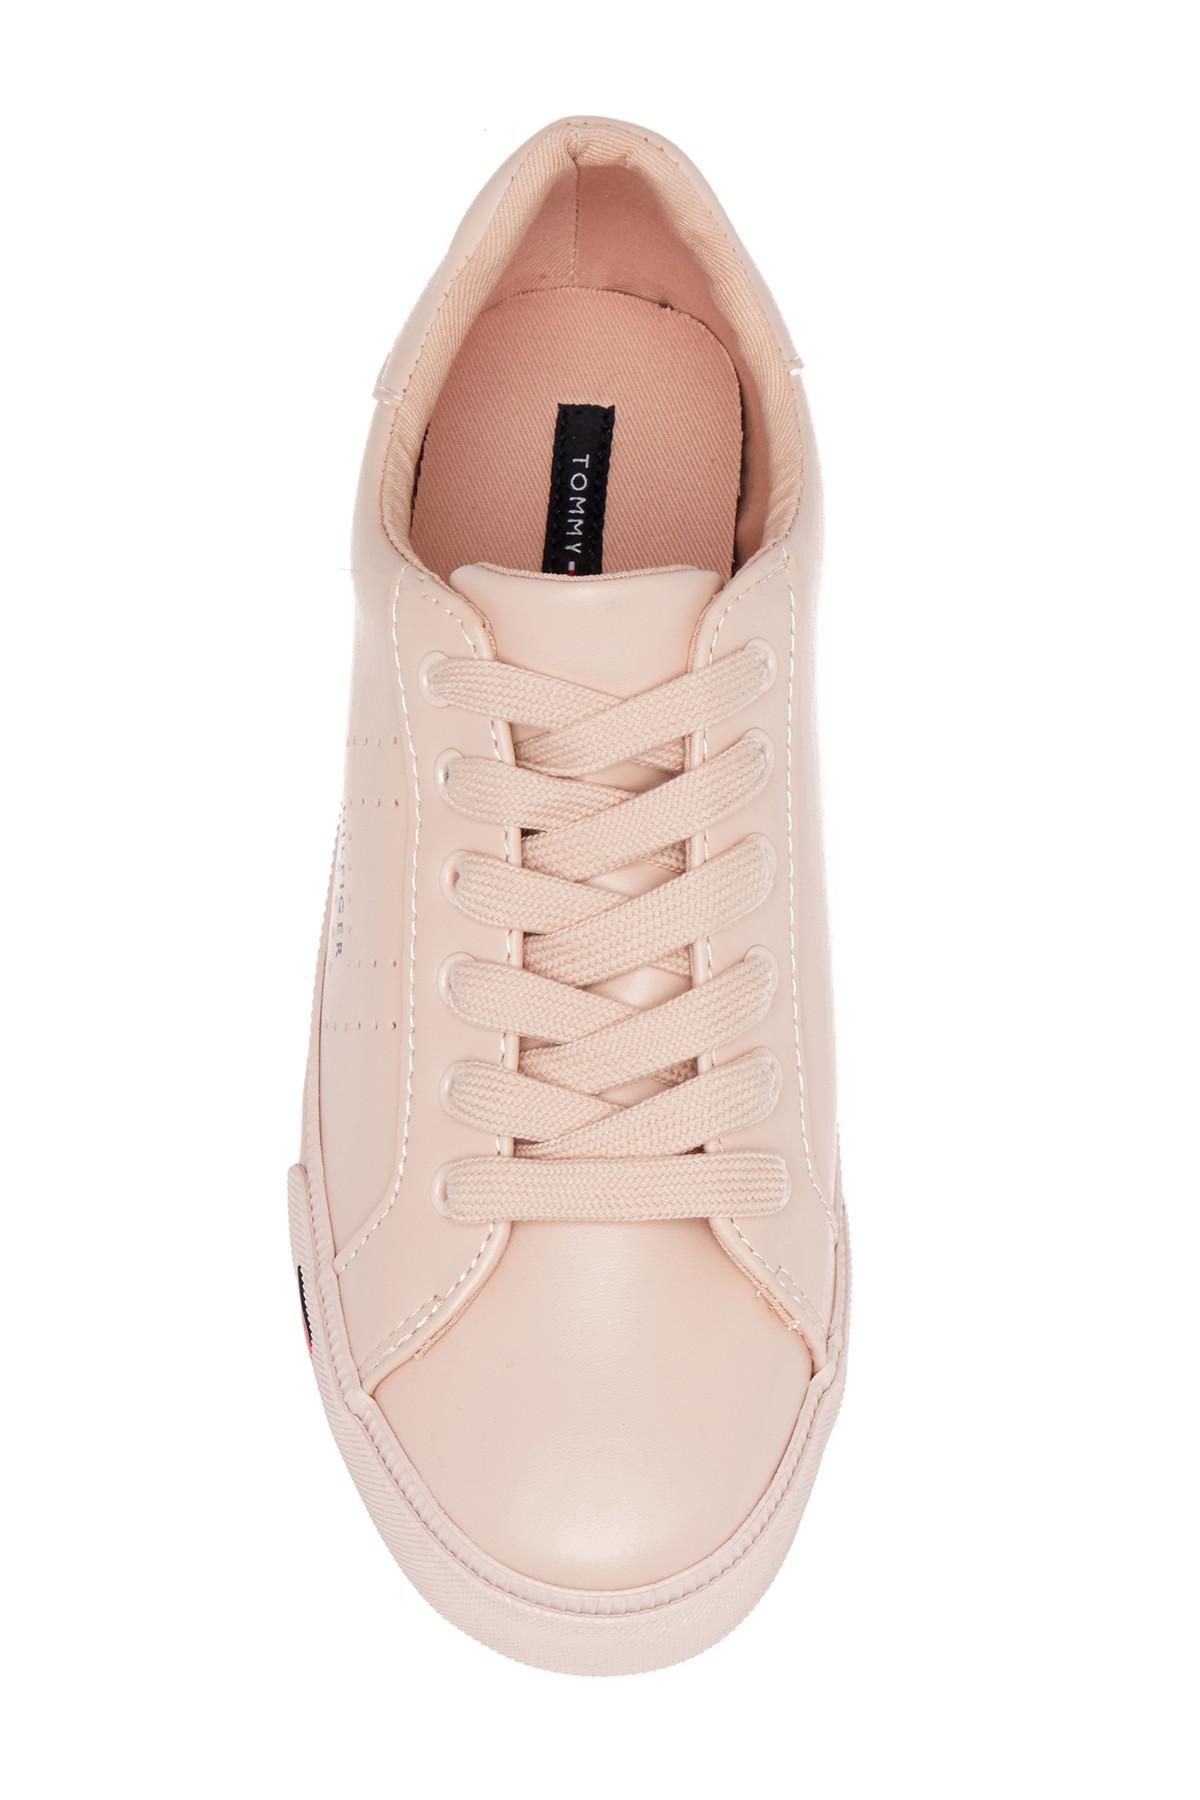 Tommy Hilfiger Leather Luster Sneaker in Light Pink ll (Pink) | Lyst